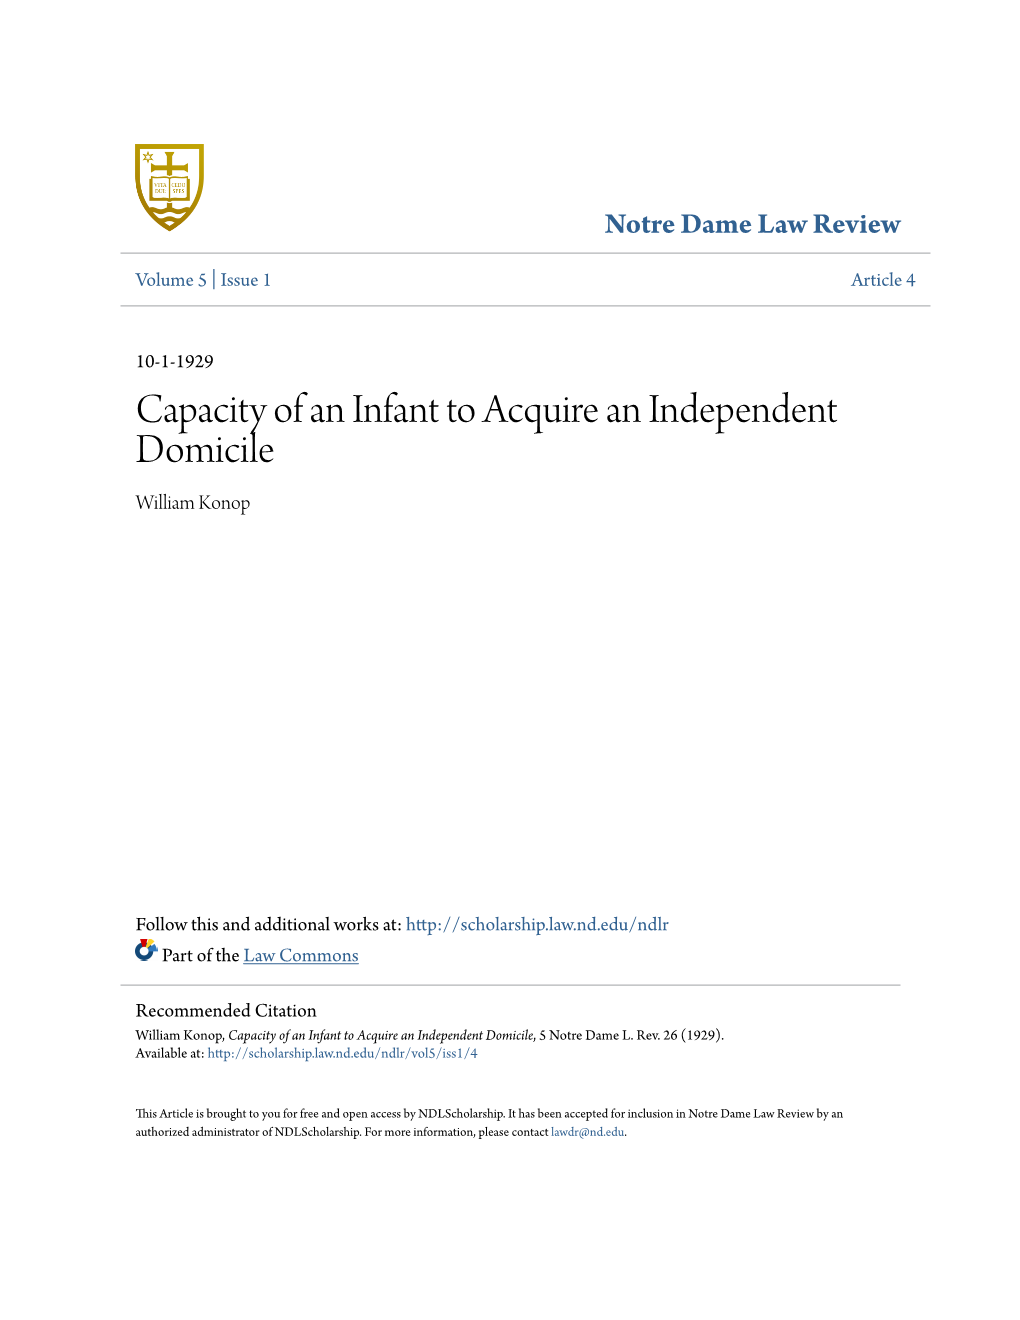 Capacity of an Infant to Acquire an Independent Domicile William Konop